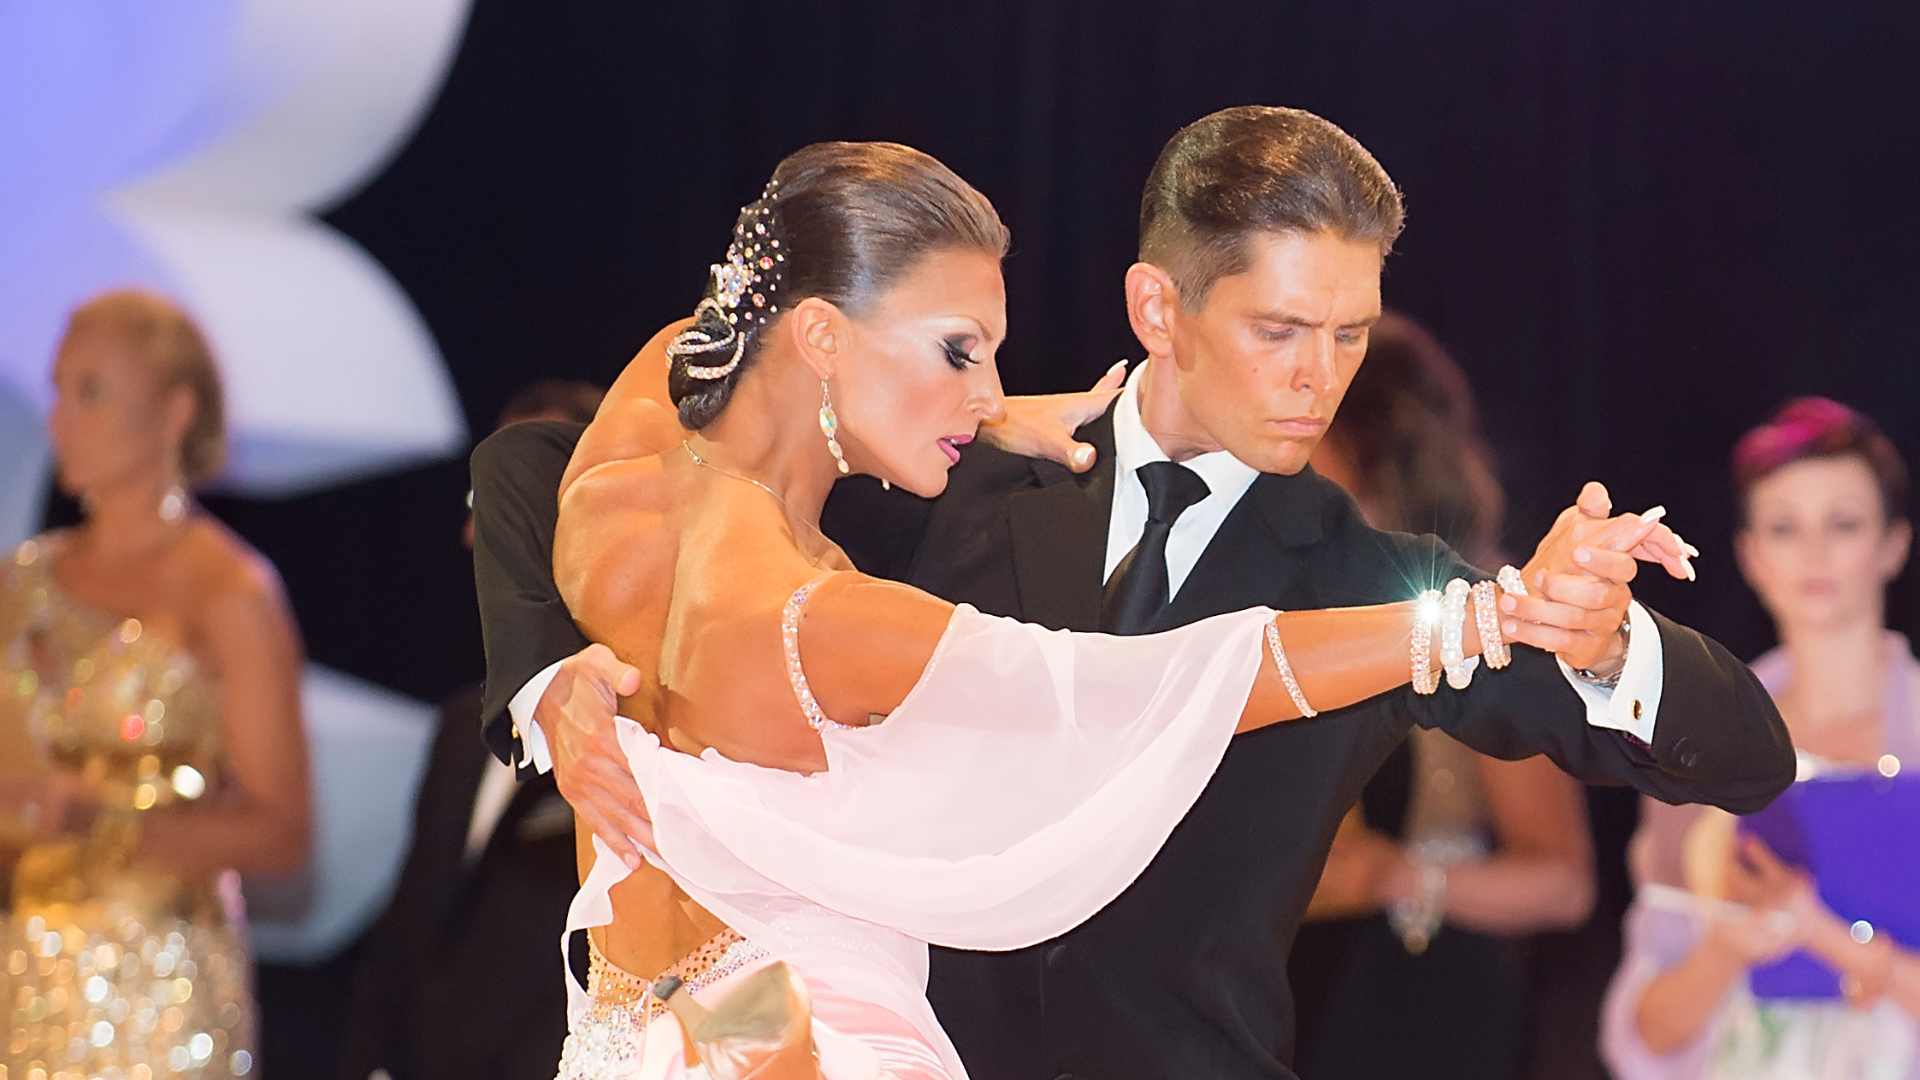 Image for the blog: How to Dance Viennese Waltz